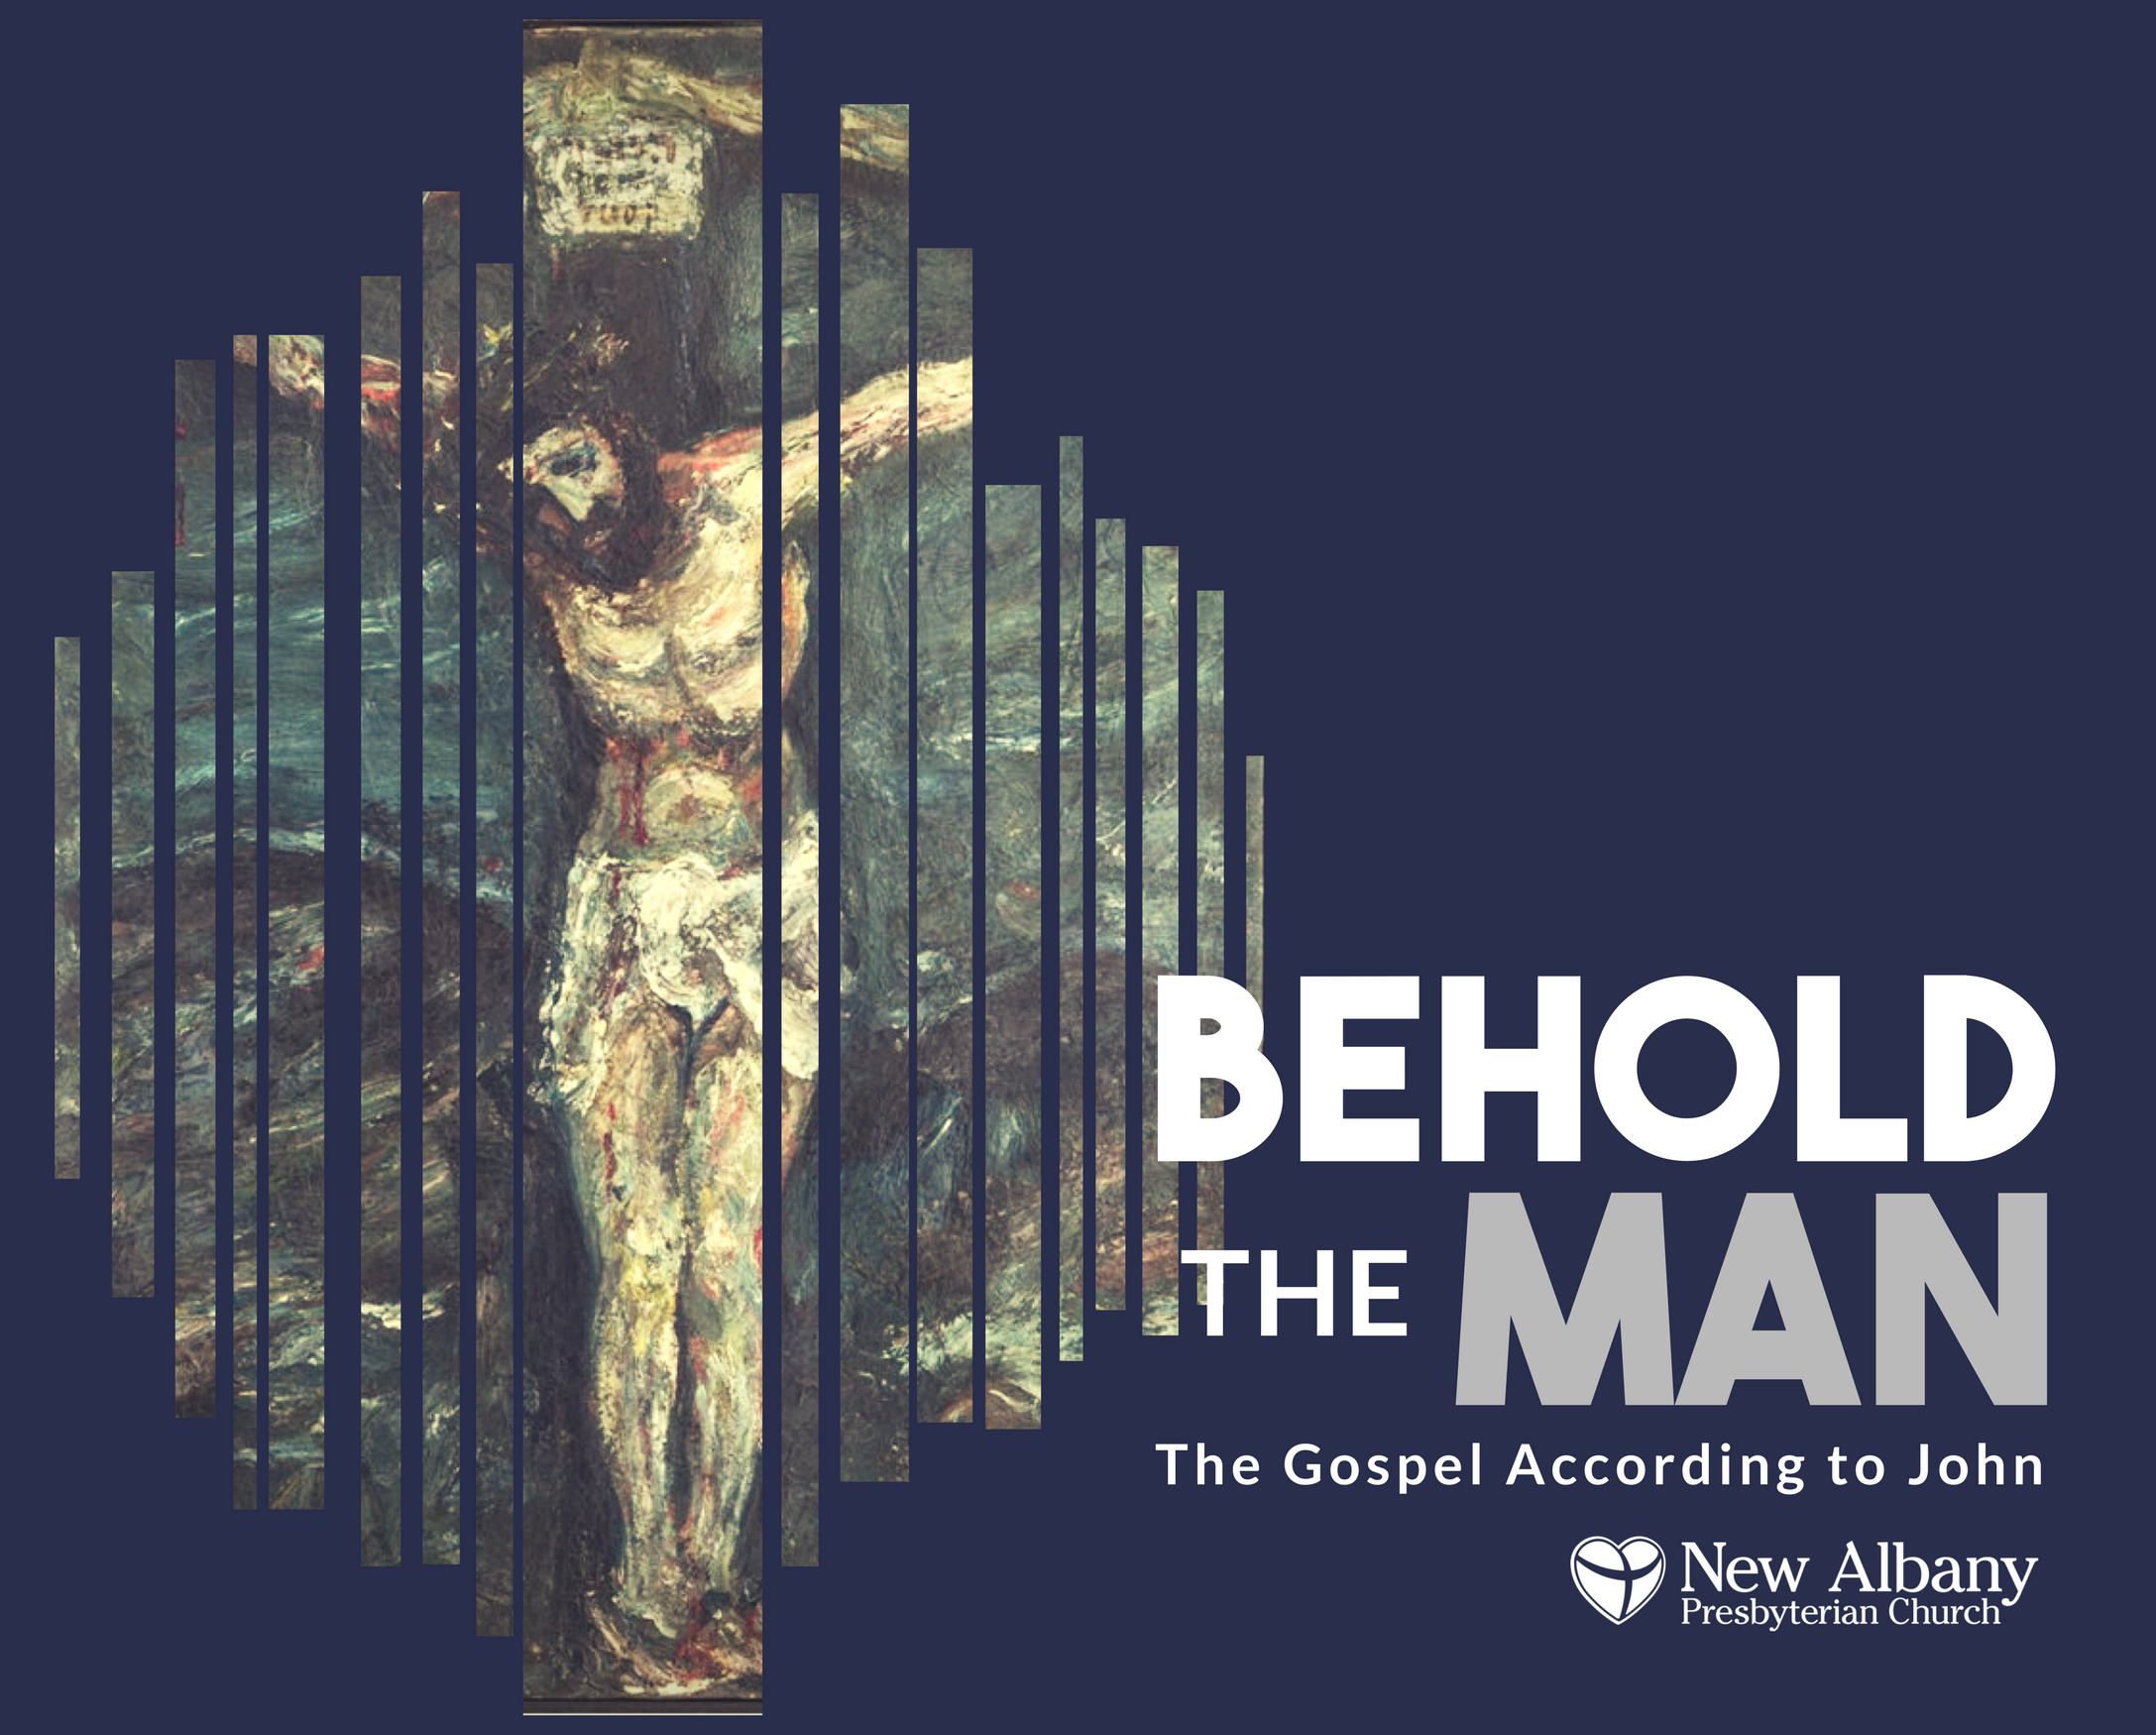 Behold The Man: Jesus, the great “I AM”